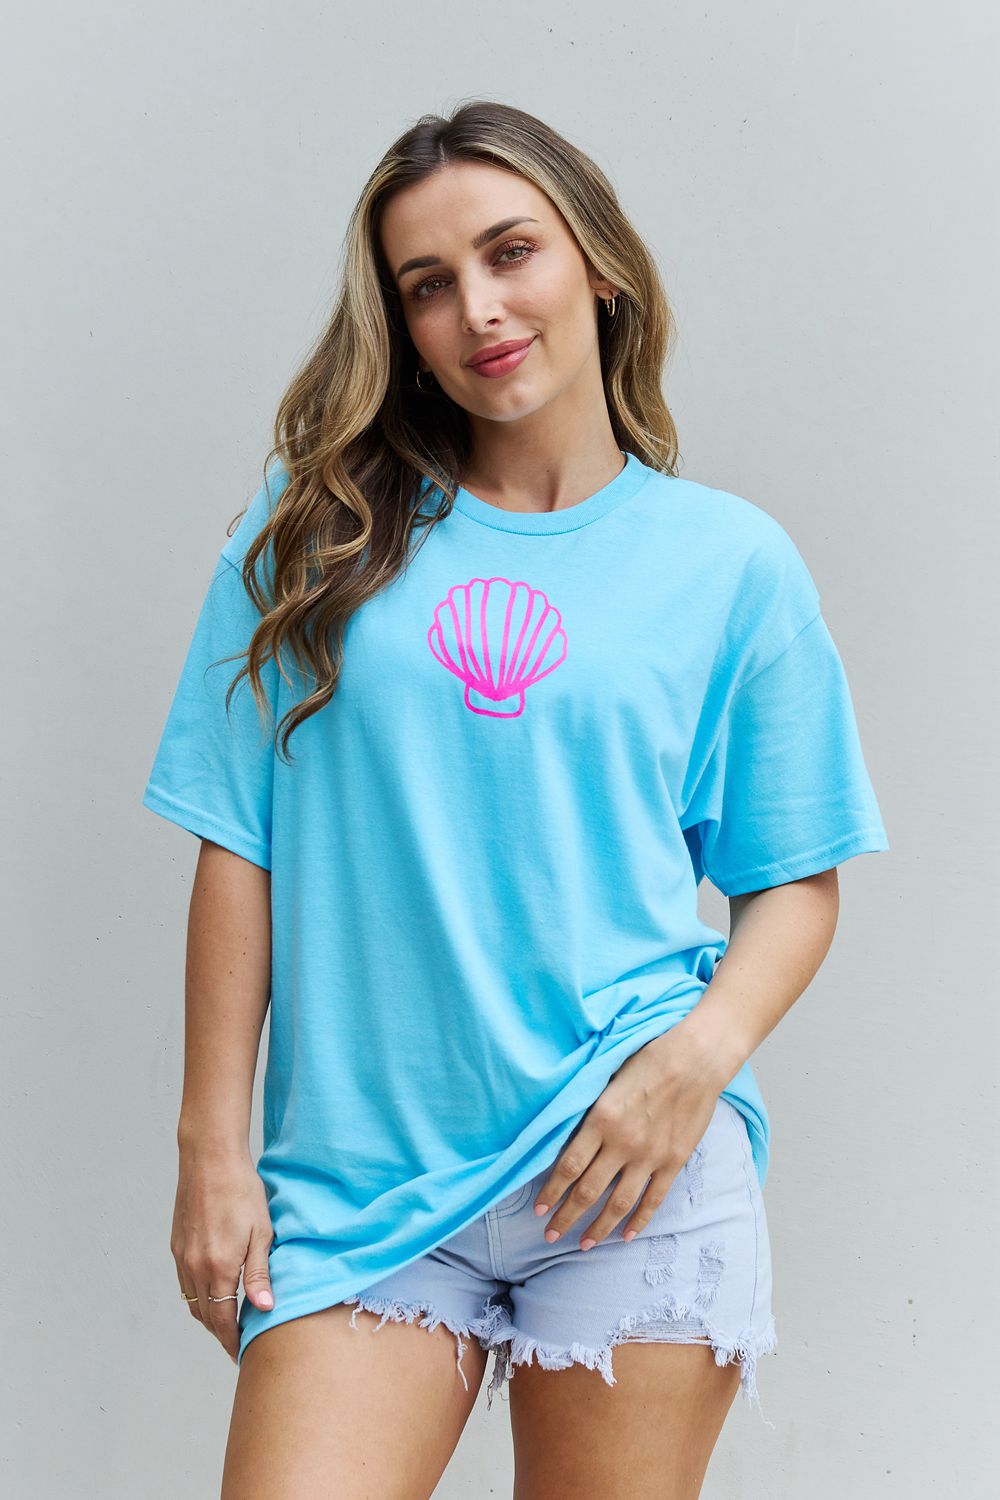 Sweet Claire "More Beach Days" Oversized Graphic T-Shirt - Guy Christopher 